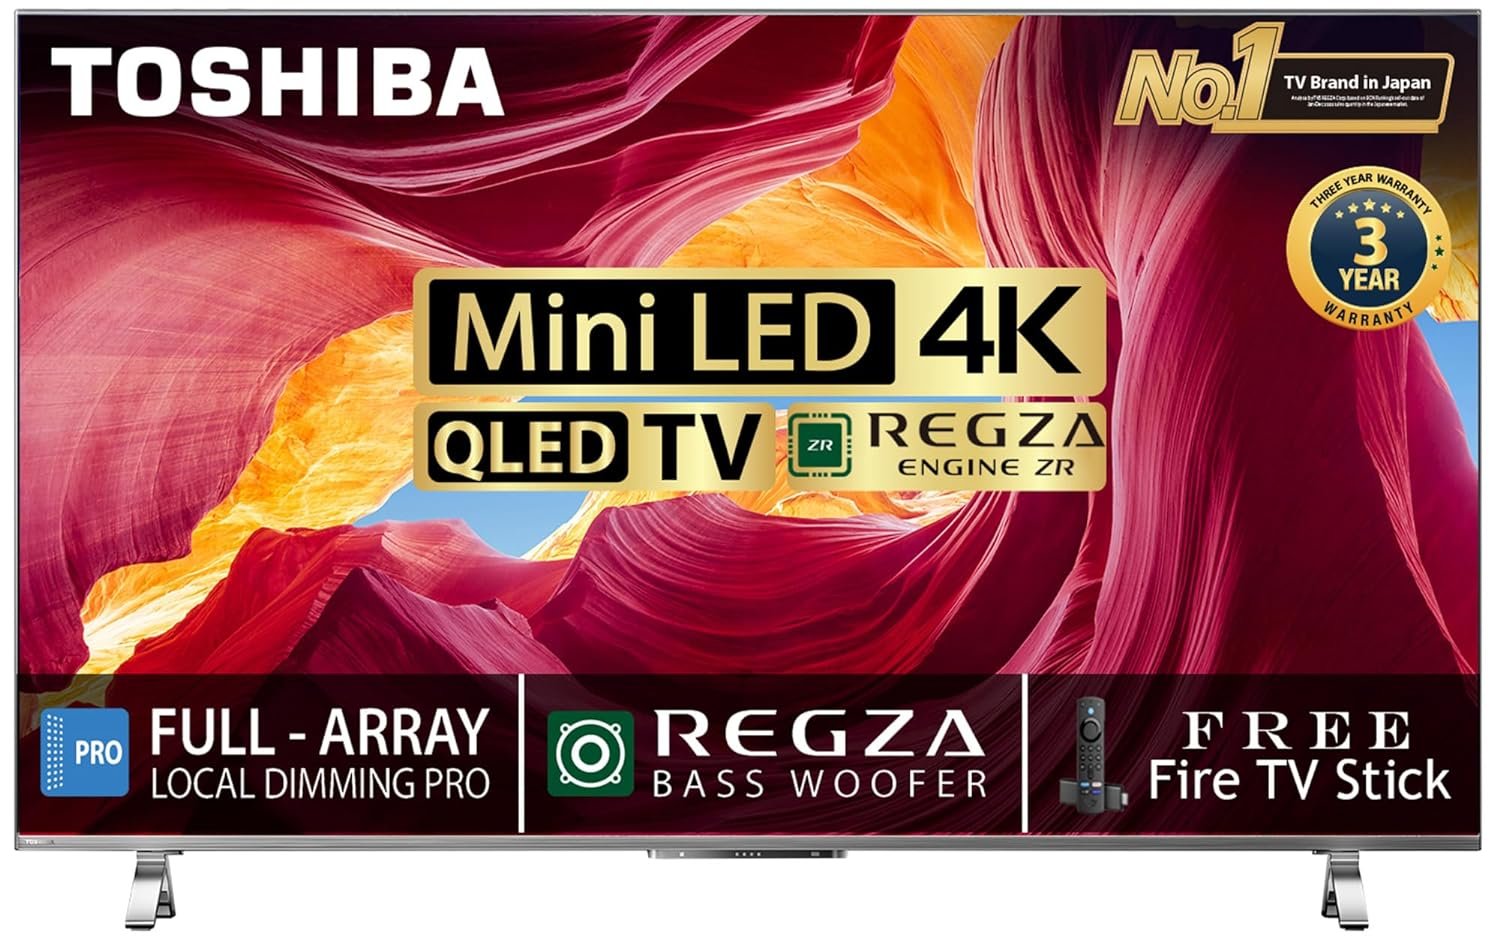 TOSHIBA 139 cm (55 inches) 4K Ultra HD Smart Super QLED TV 55M650MP (Black) | with Free Fire TV Stick After Installation